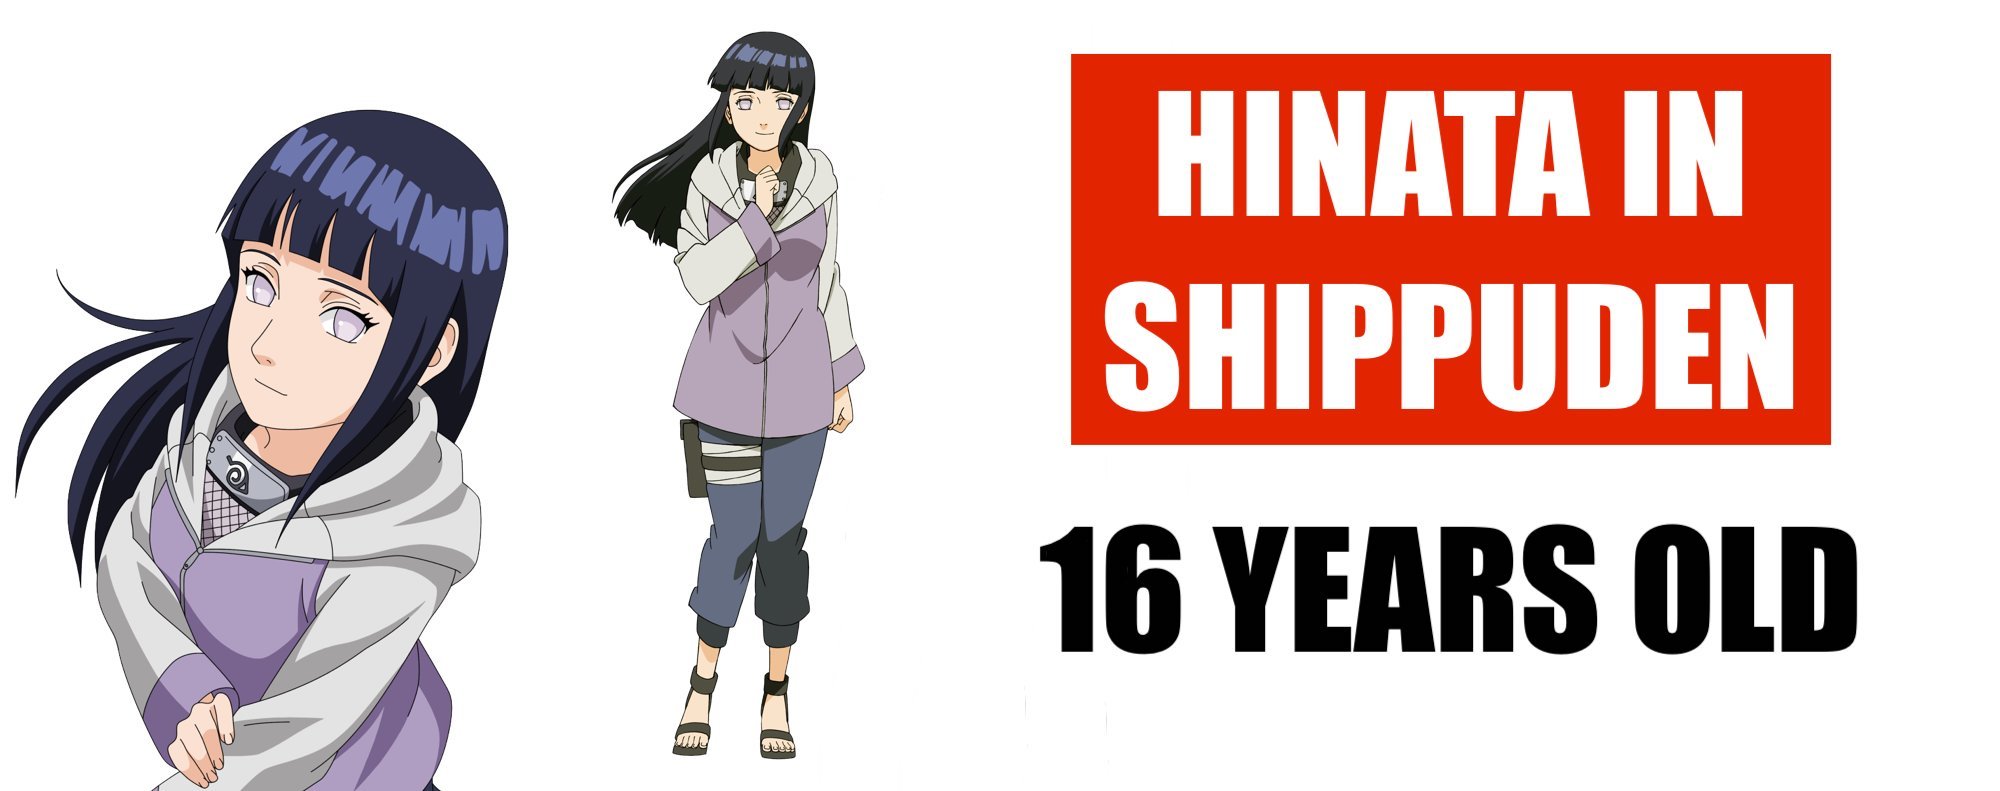 HOW OLD IS HINATA IN SHIPPUDEN